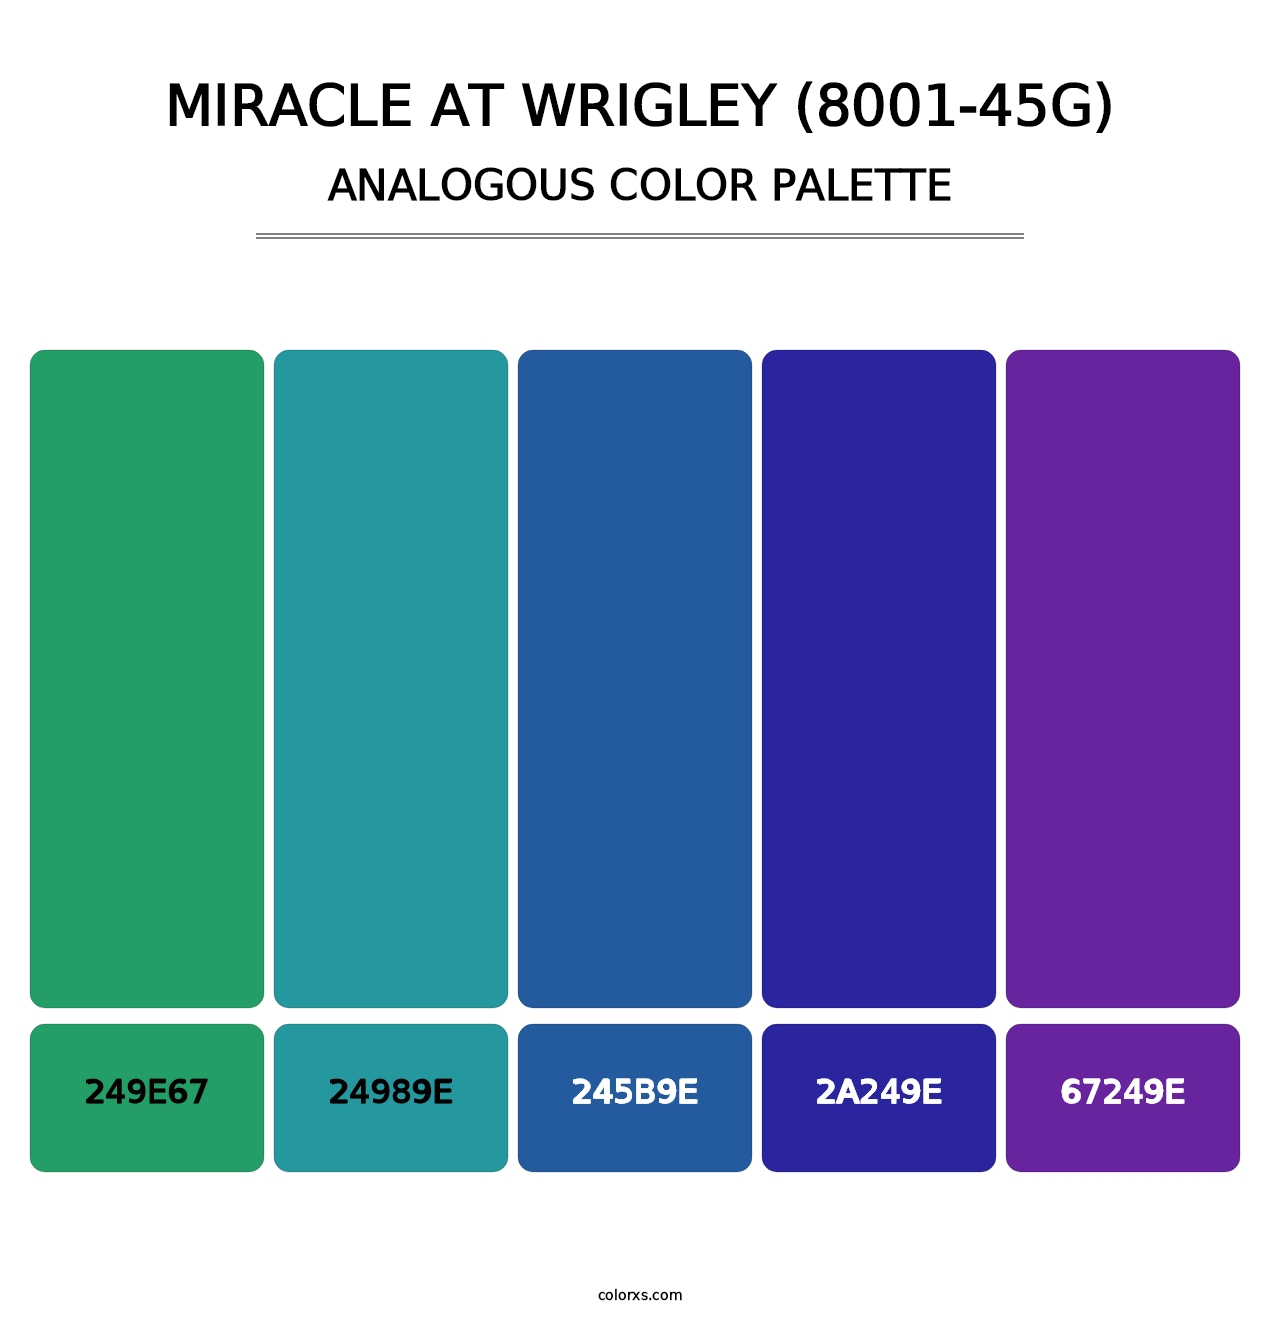 Miracle at Wrigley (8001-45G) - Analogous Color Palette